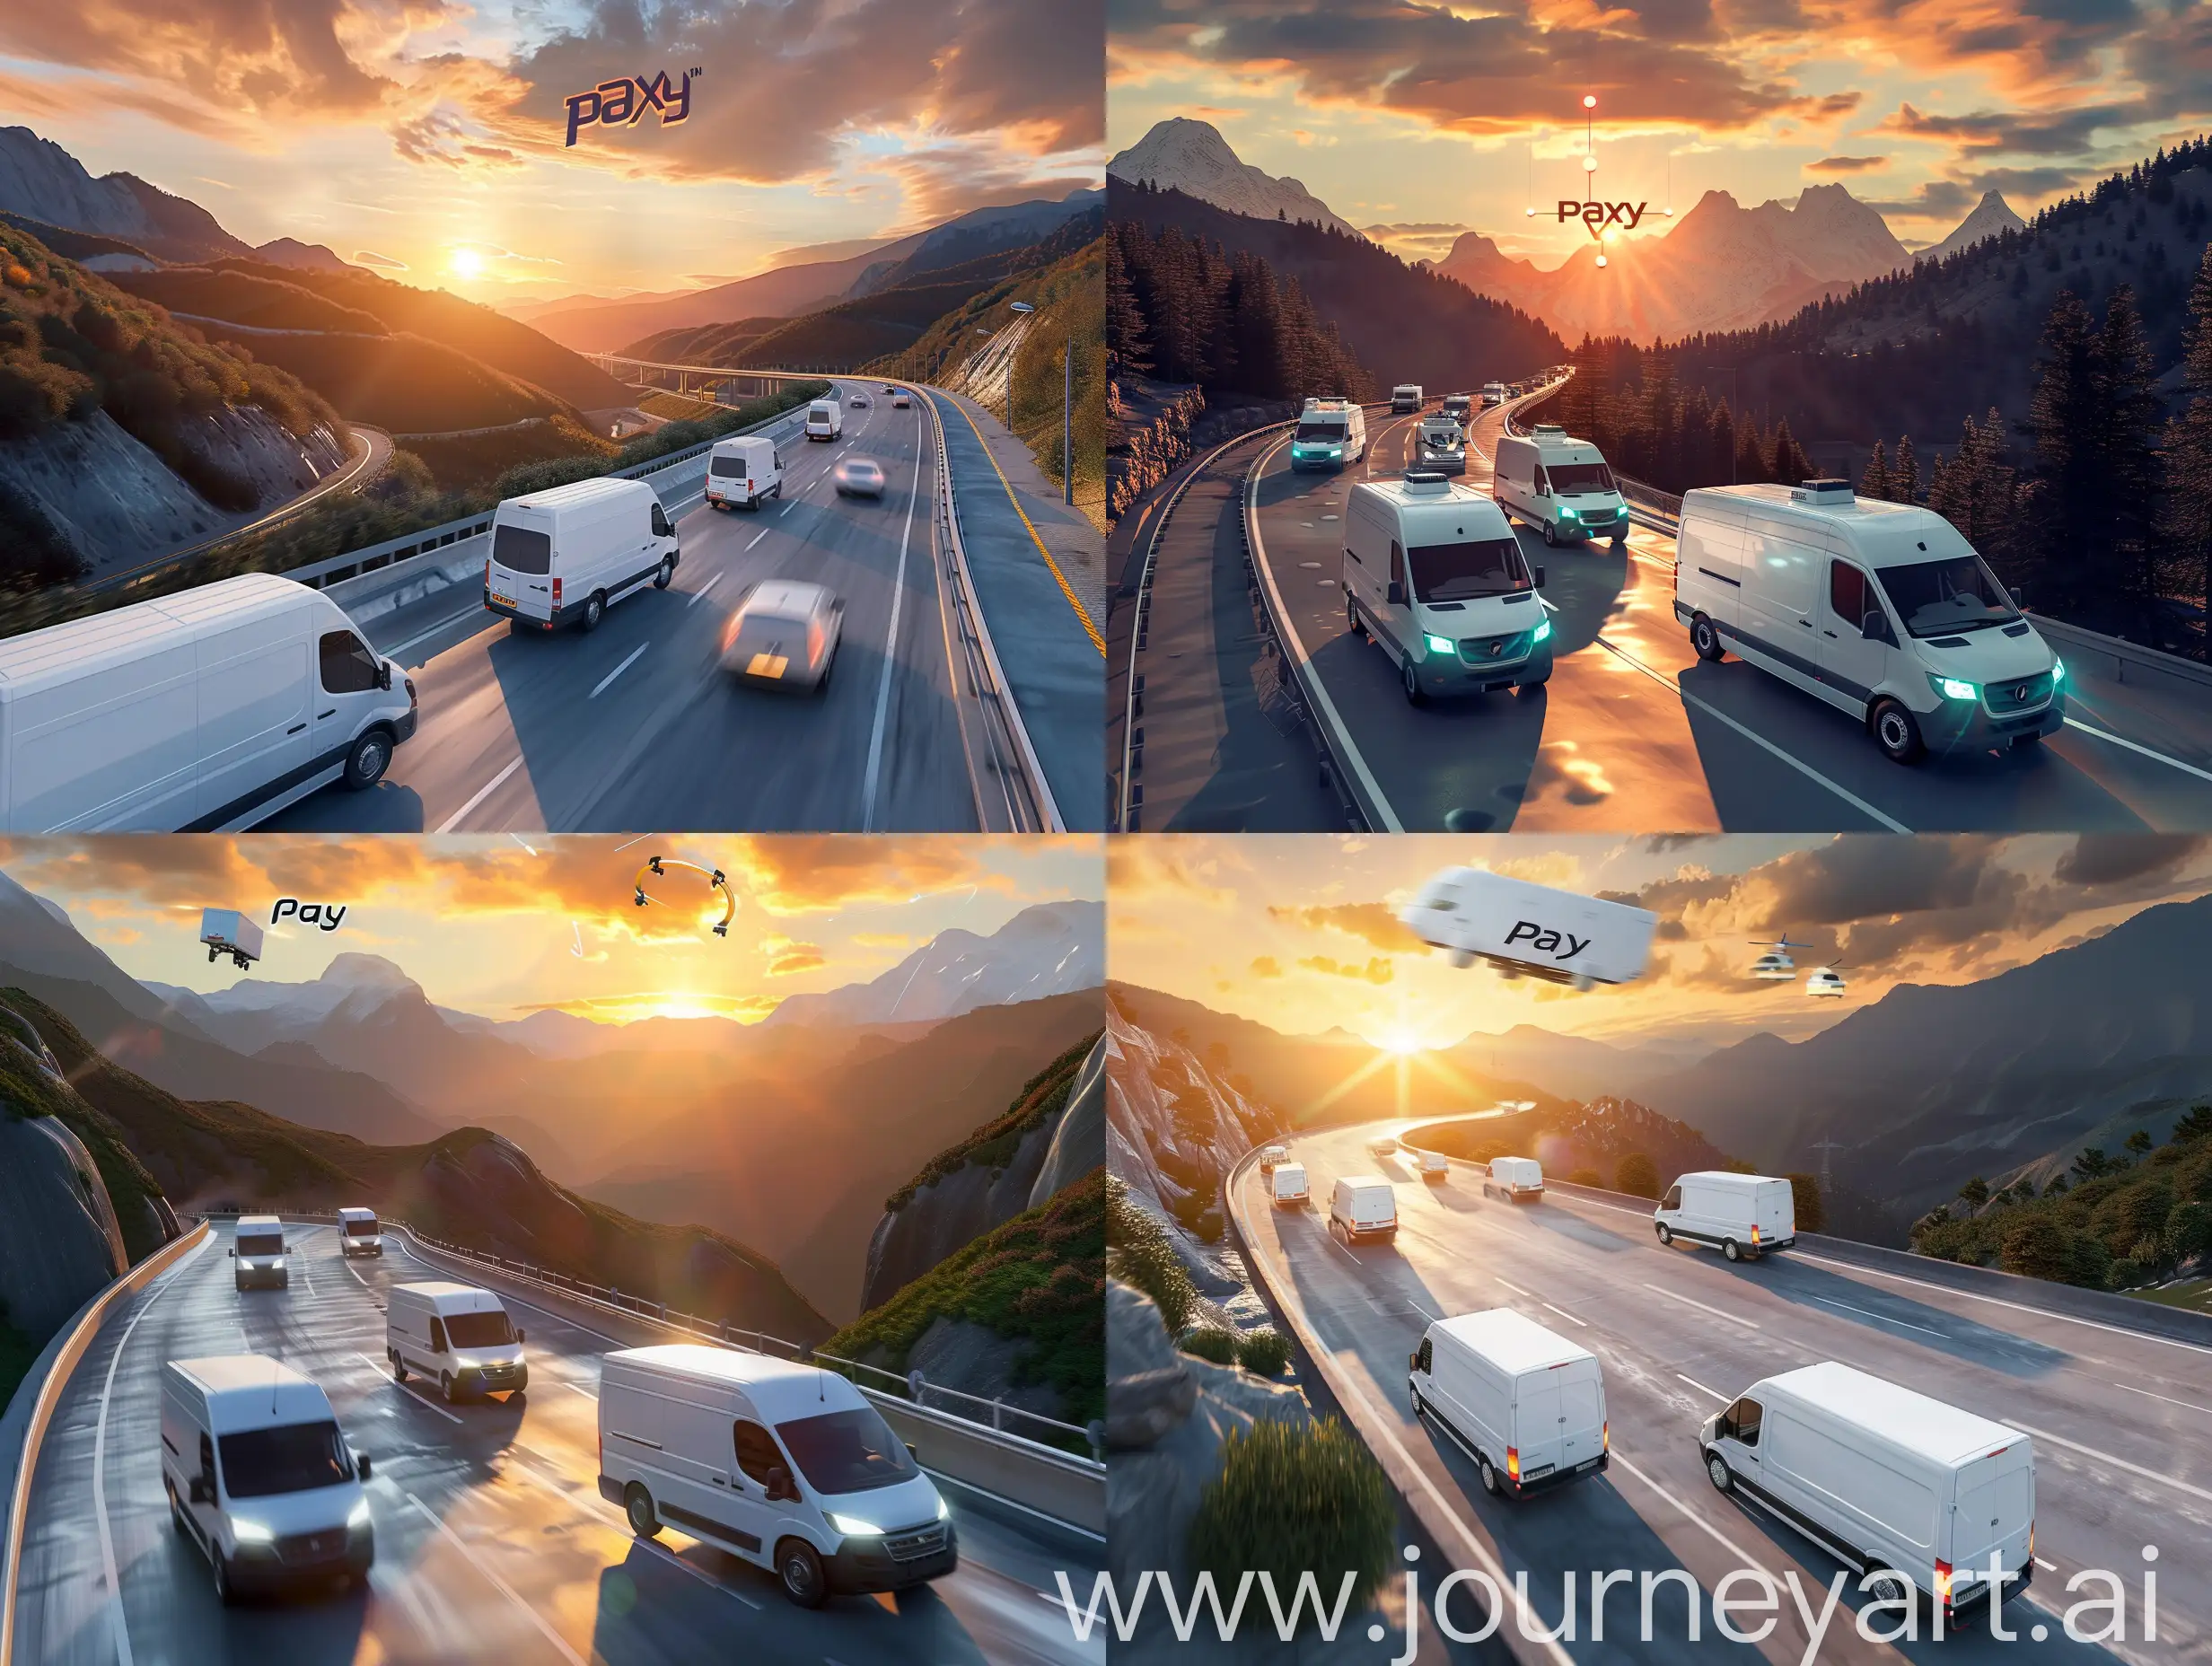 white delivery vans speeding on an expressway through mountain valleys at sunset, with a  'Paxy' logo flying above. The scene captures the dynamic atmosphere of the movment, natural landscape with the advanced technology, setting sun. photorealistic